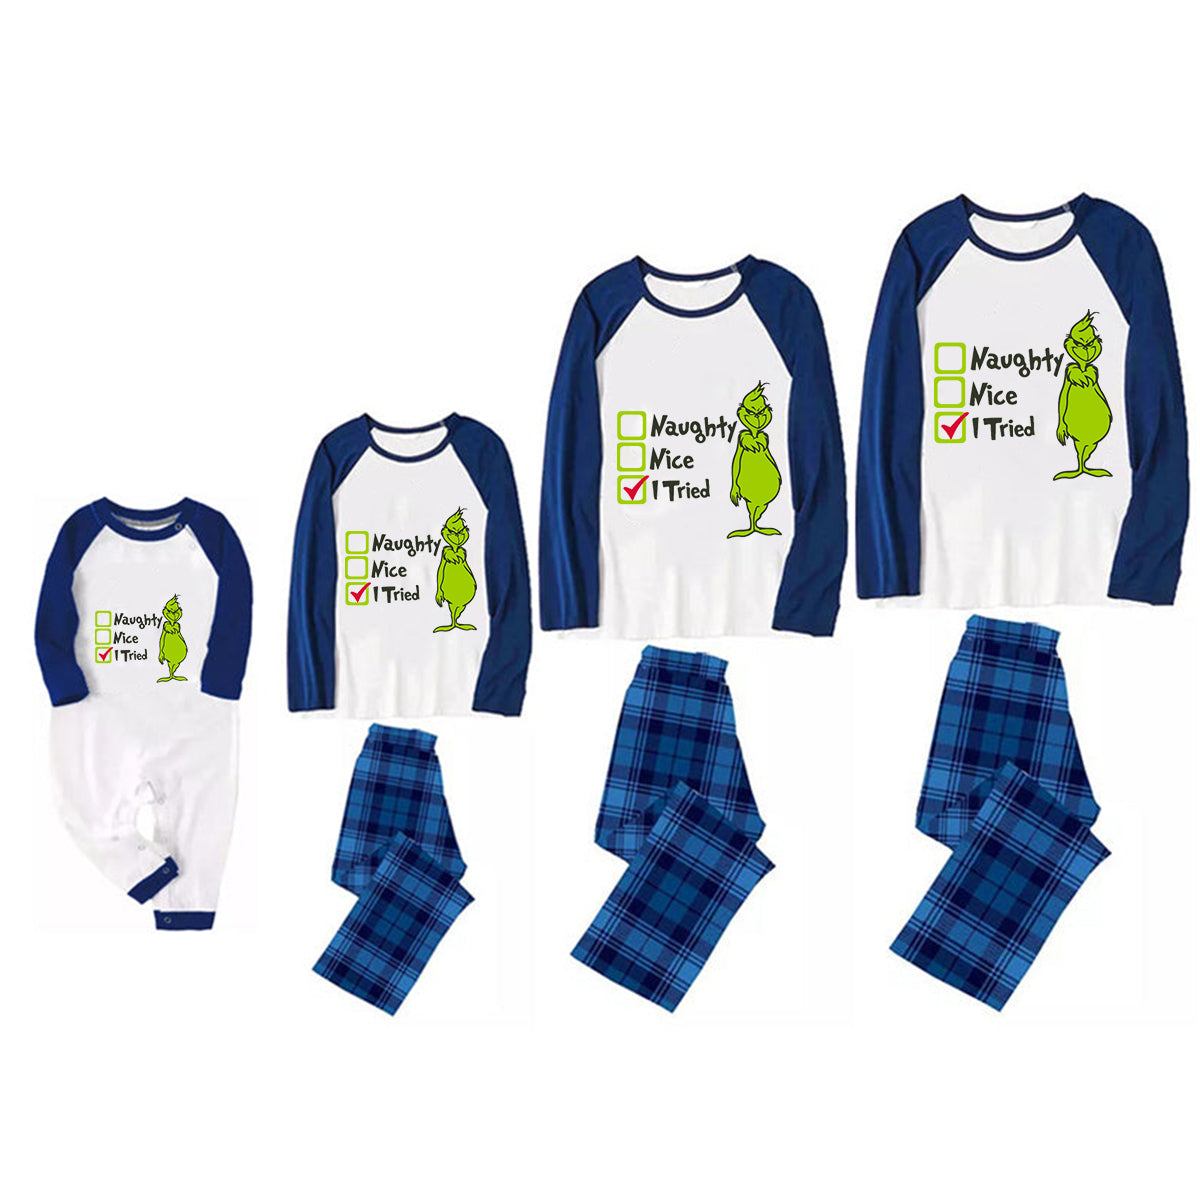 Christmas "Naughty&Nice& I Tried" Letter Print Patterned Casual Long Sleeve Sweatshirts Blue Sleeve Contrast Tops and Blue Plaid Pants Family Matching Pajamas Sets With Pet Bandana